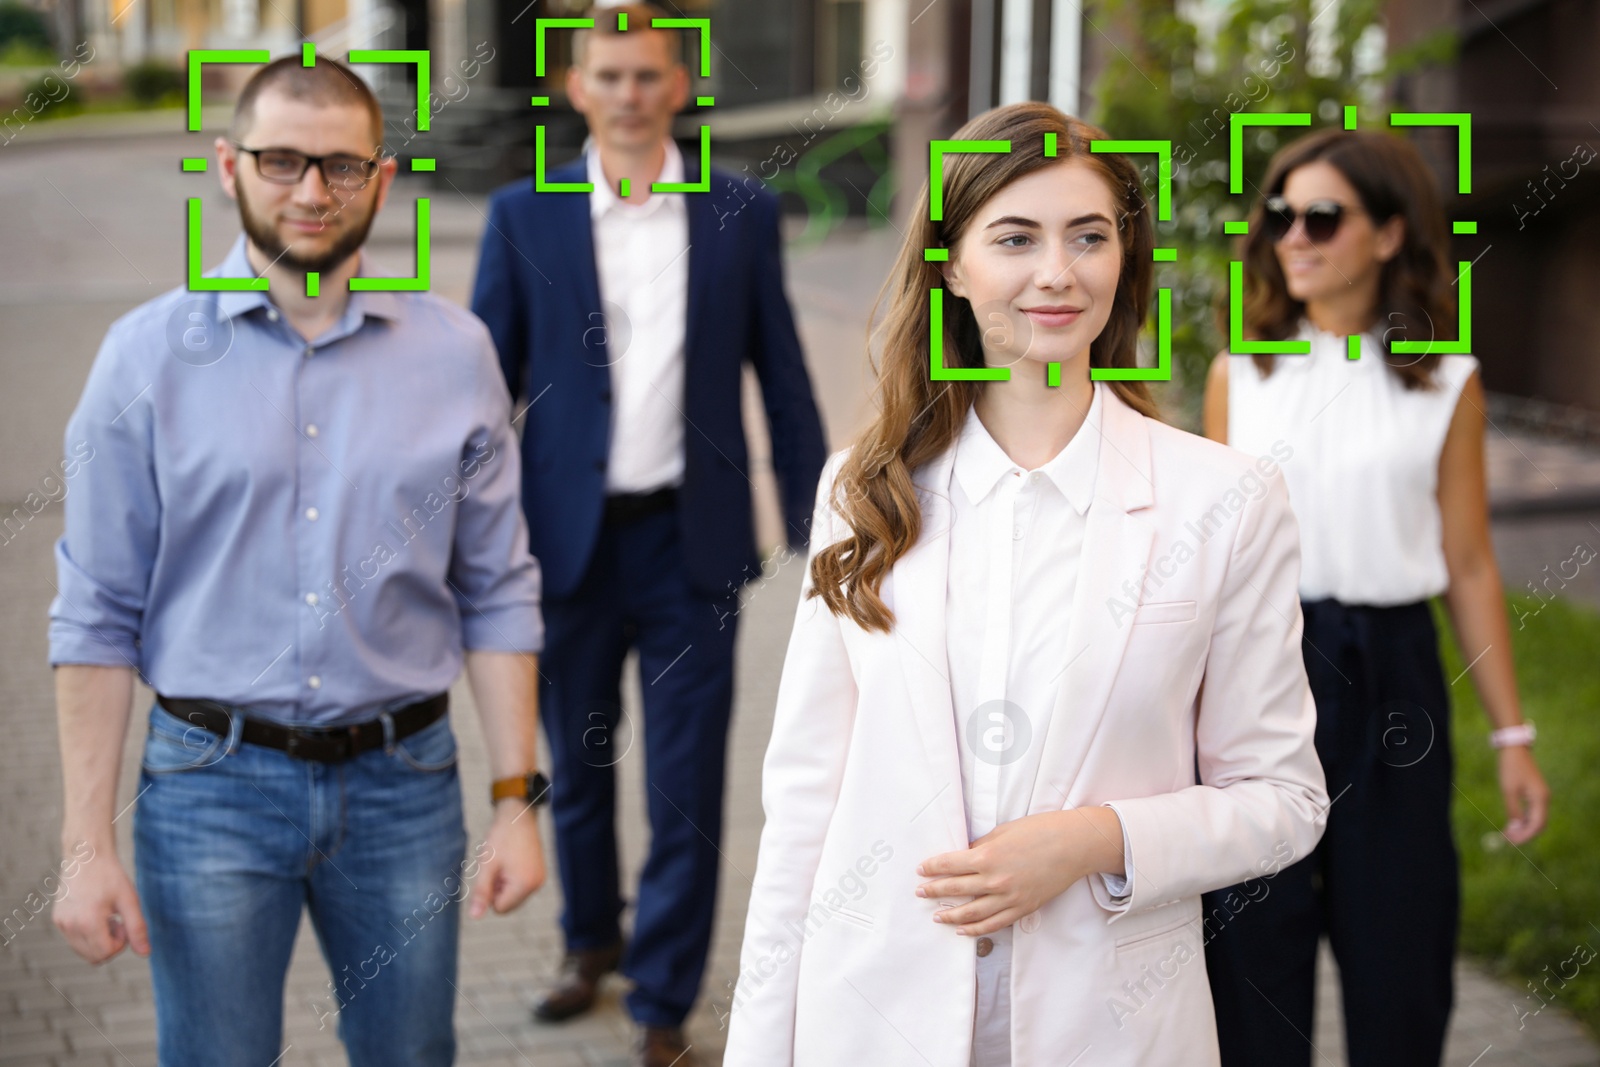 Image of Facial recognition system identifying people on city street 